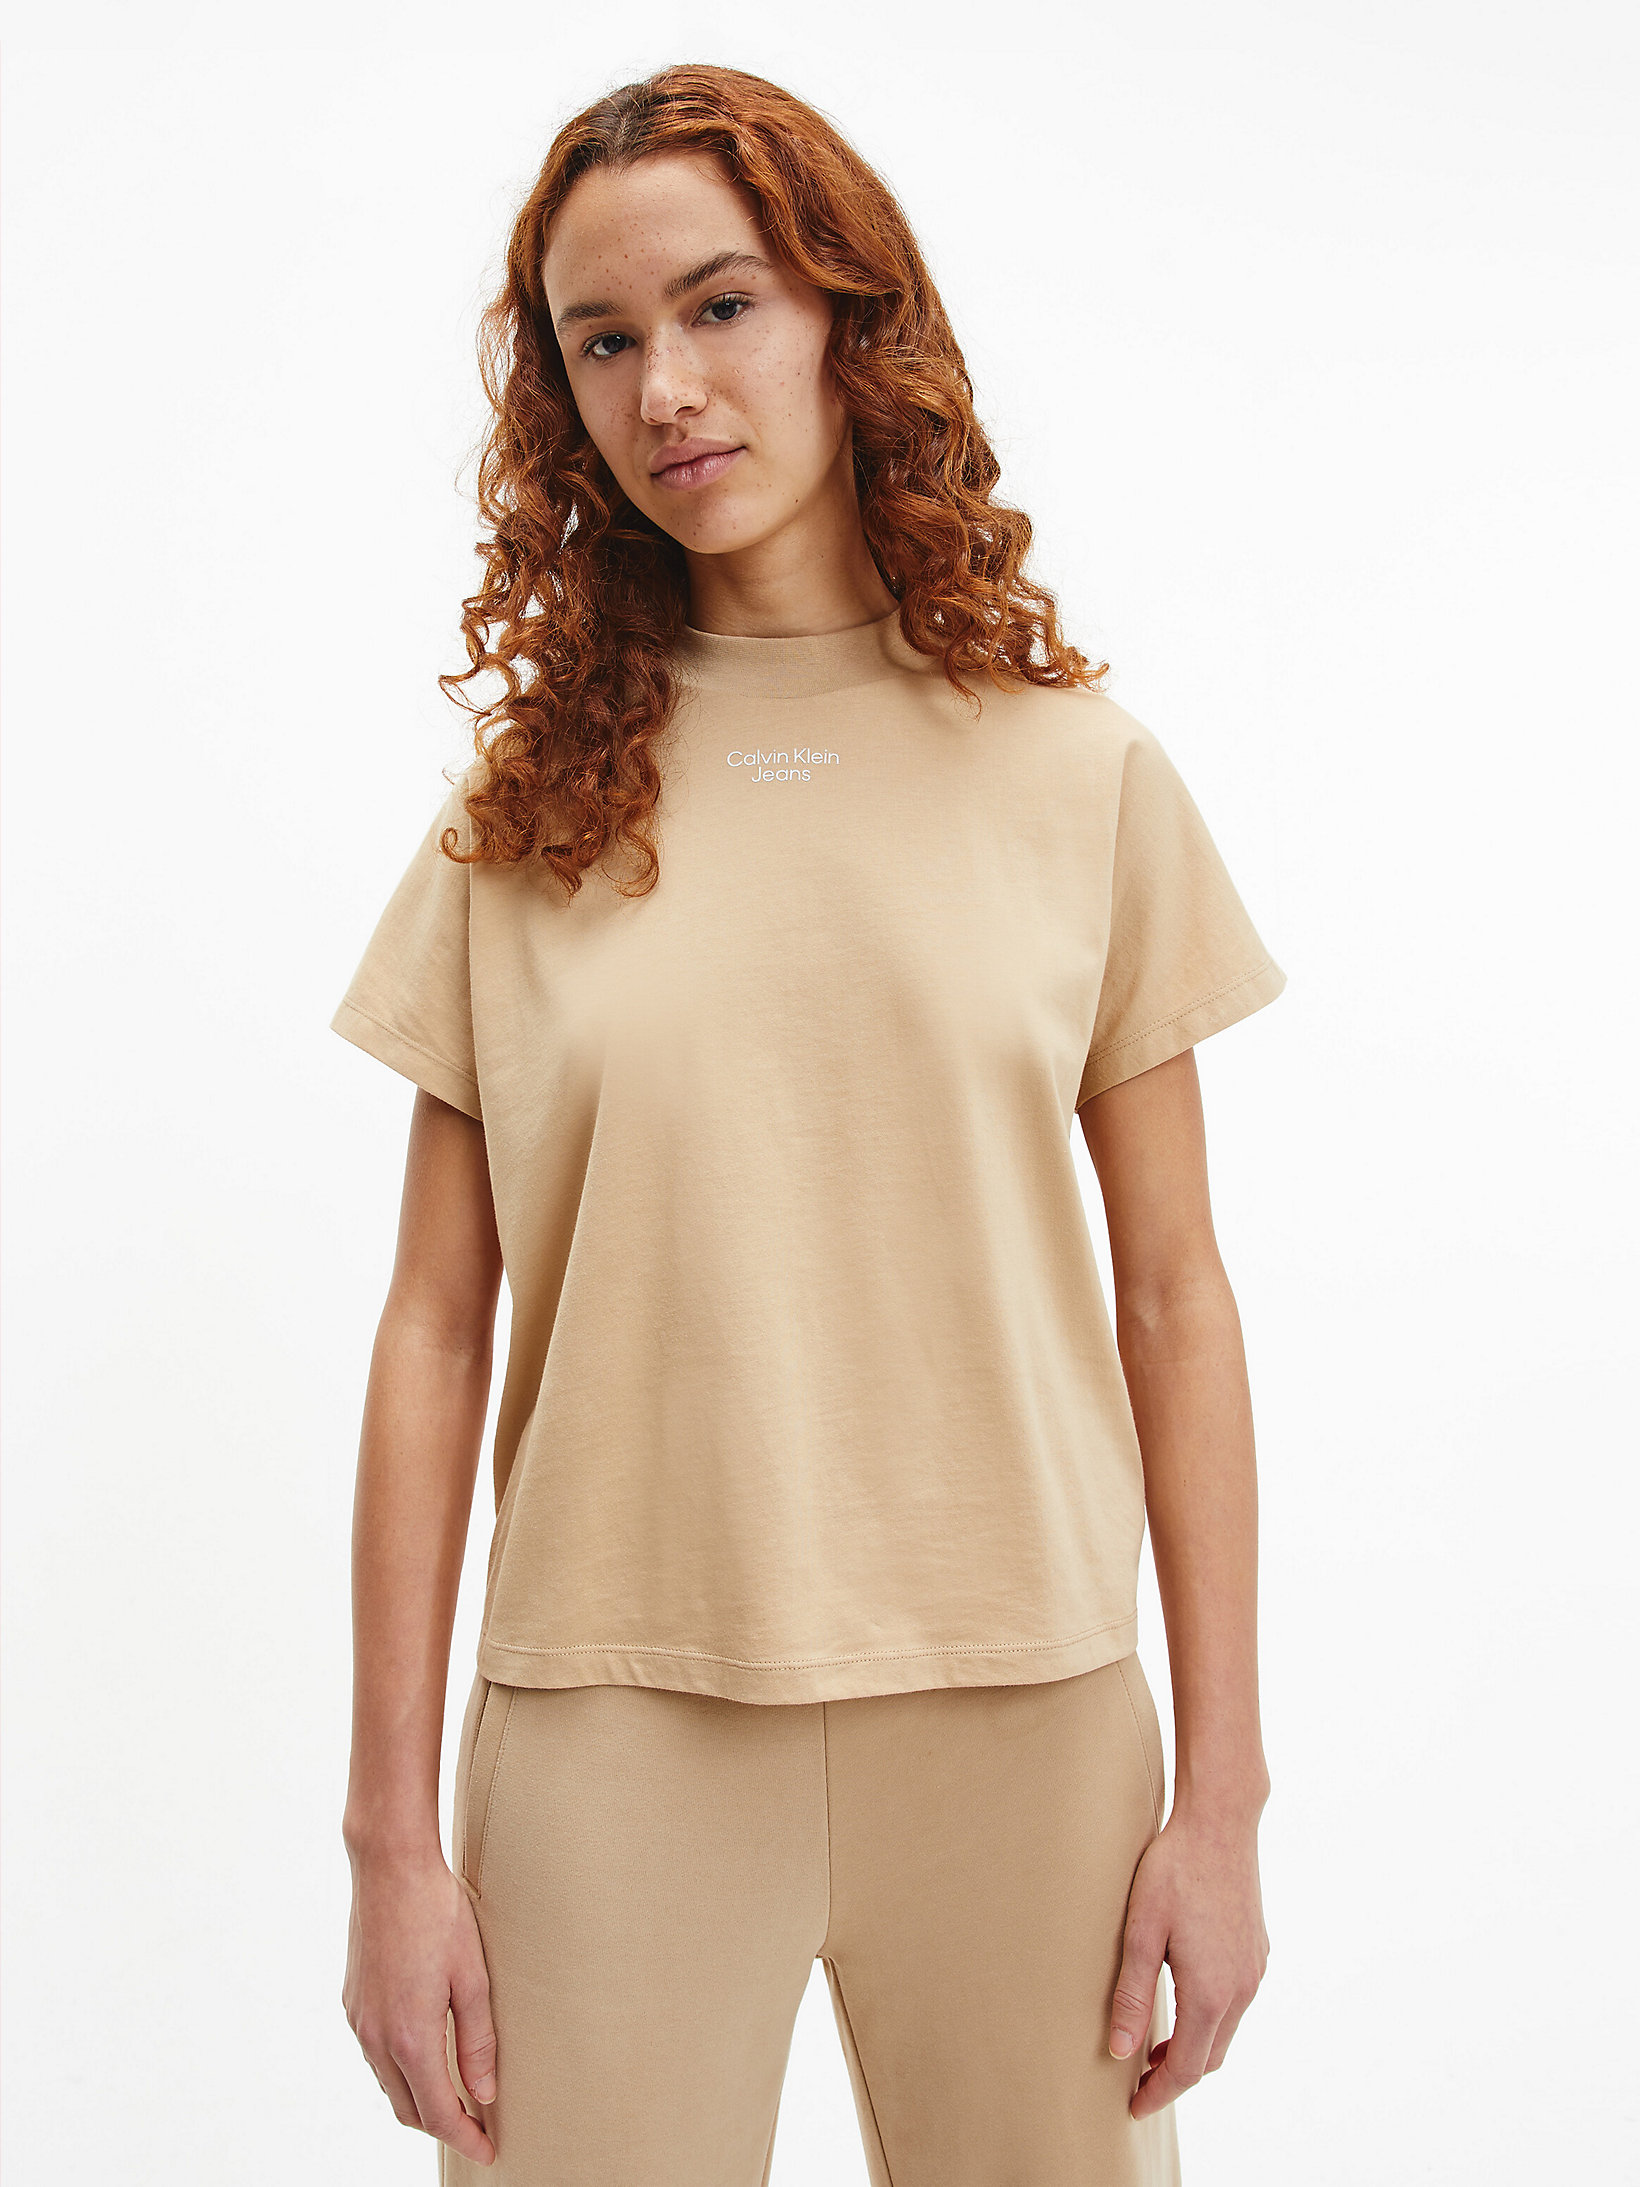 T-Shirt Relaxed En Coton Bio > Tawny Sand > undefined femmes > Calvin Klein